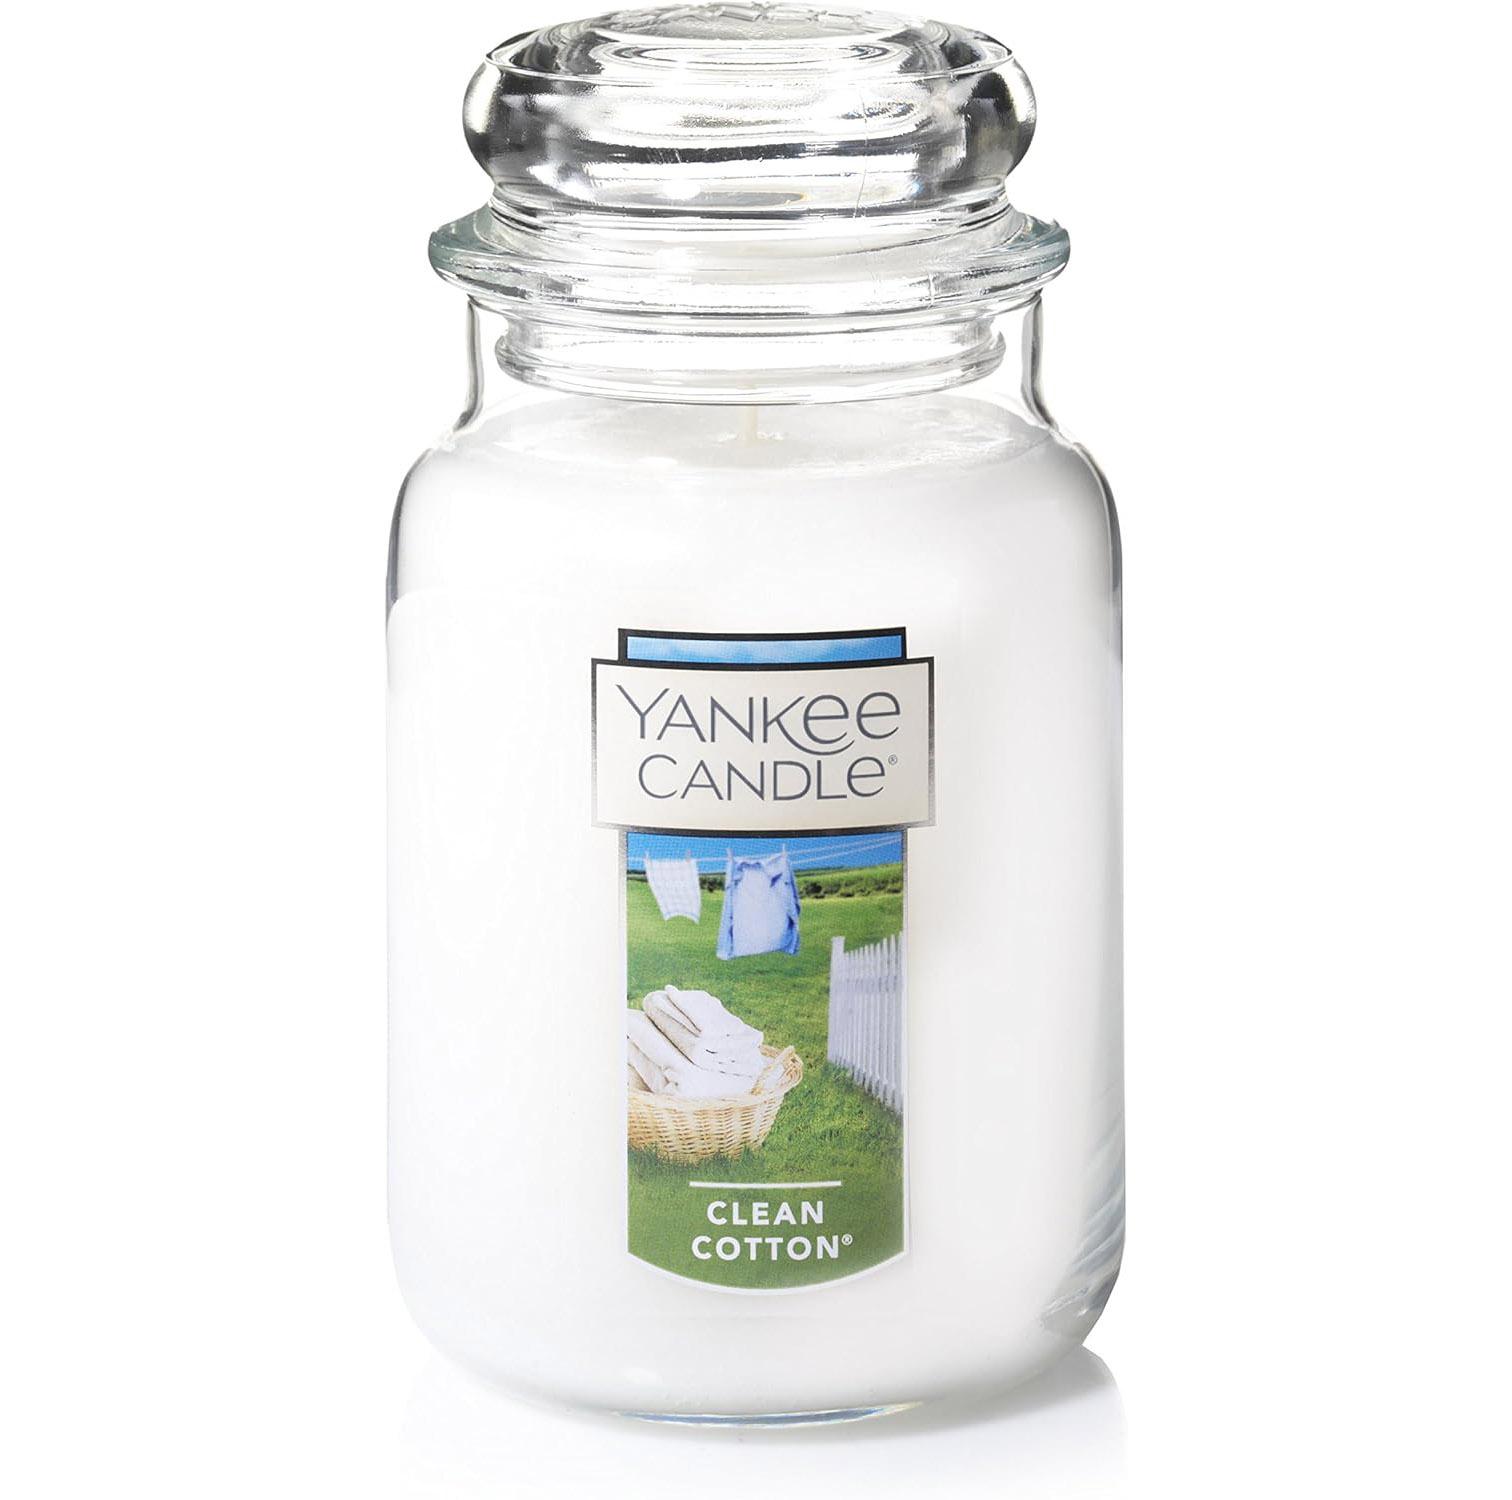 Yankee Candle Large Jar Candle Clean Cotton for $10.98 Shipped